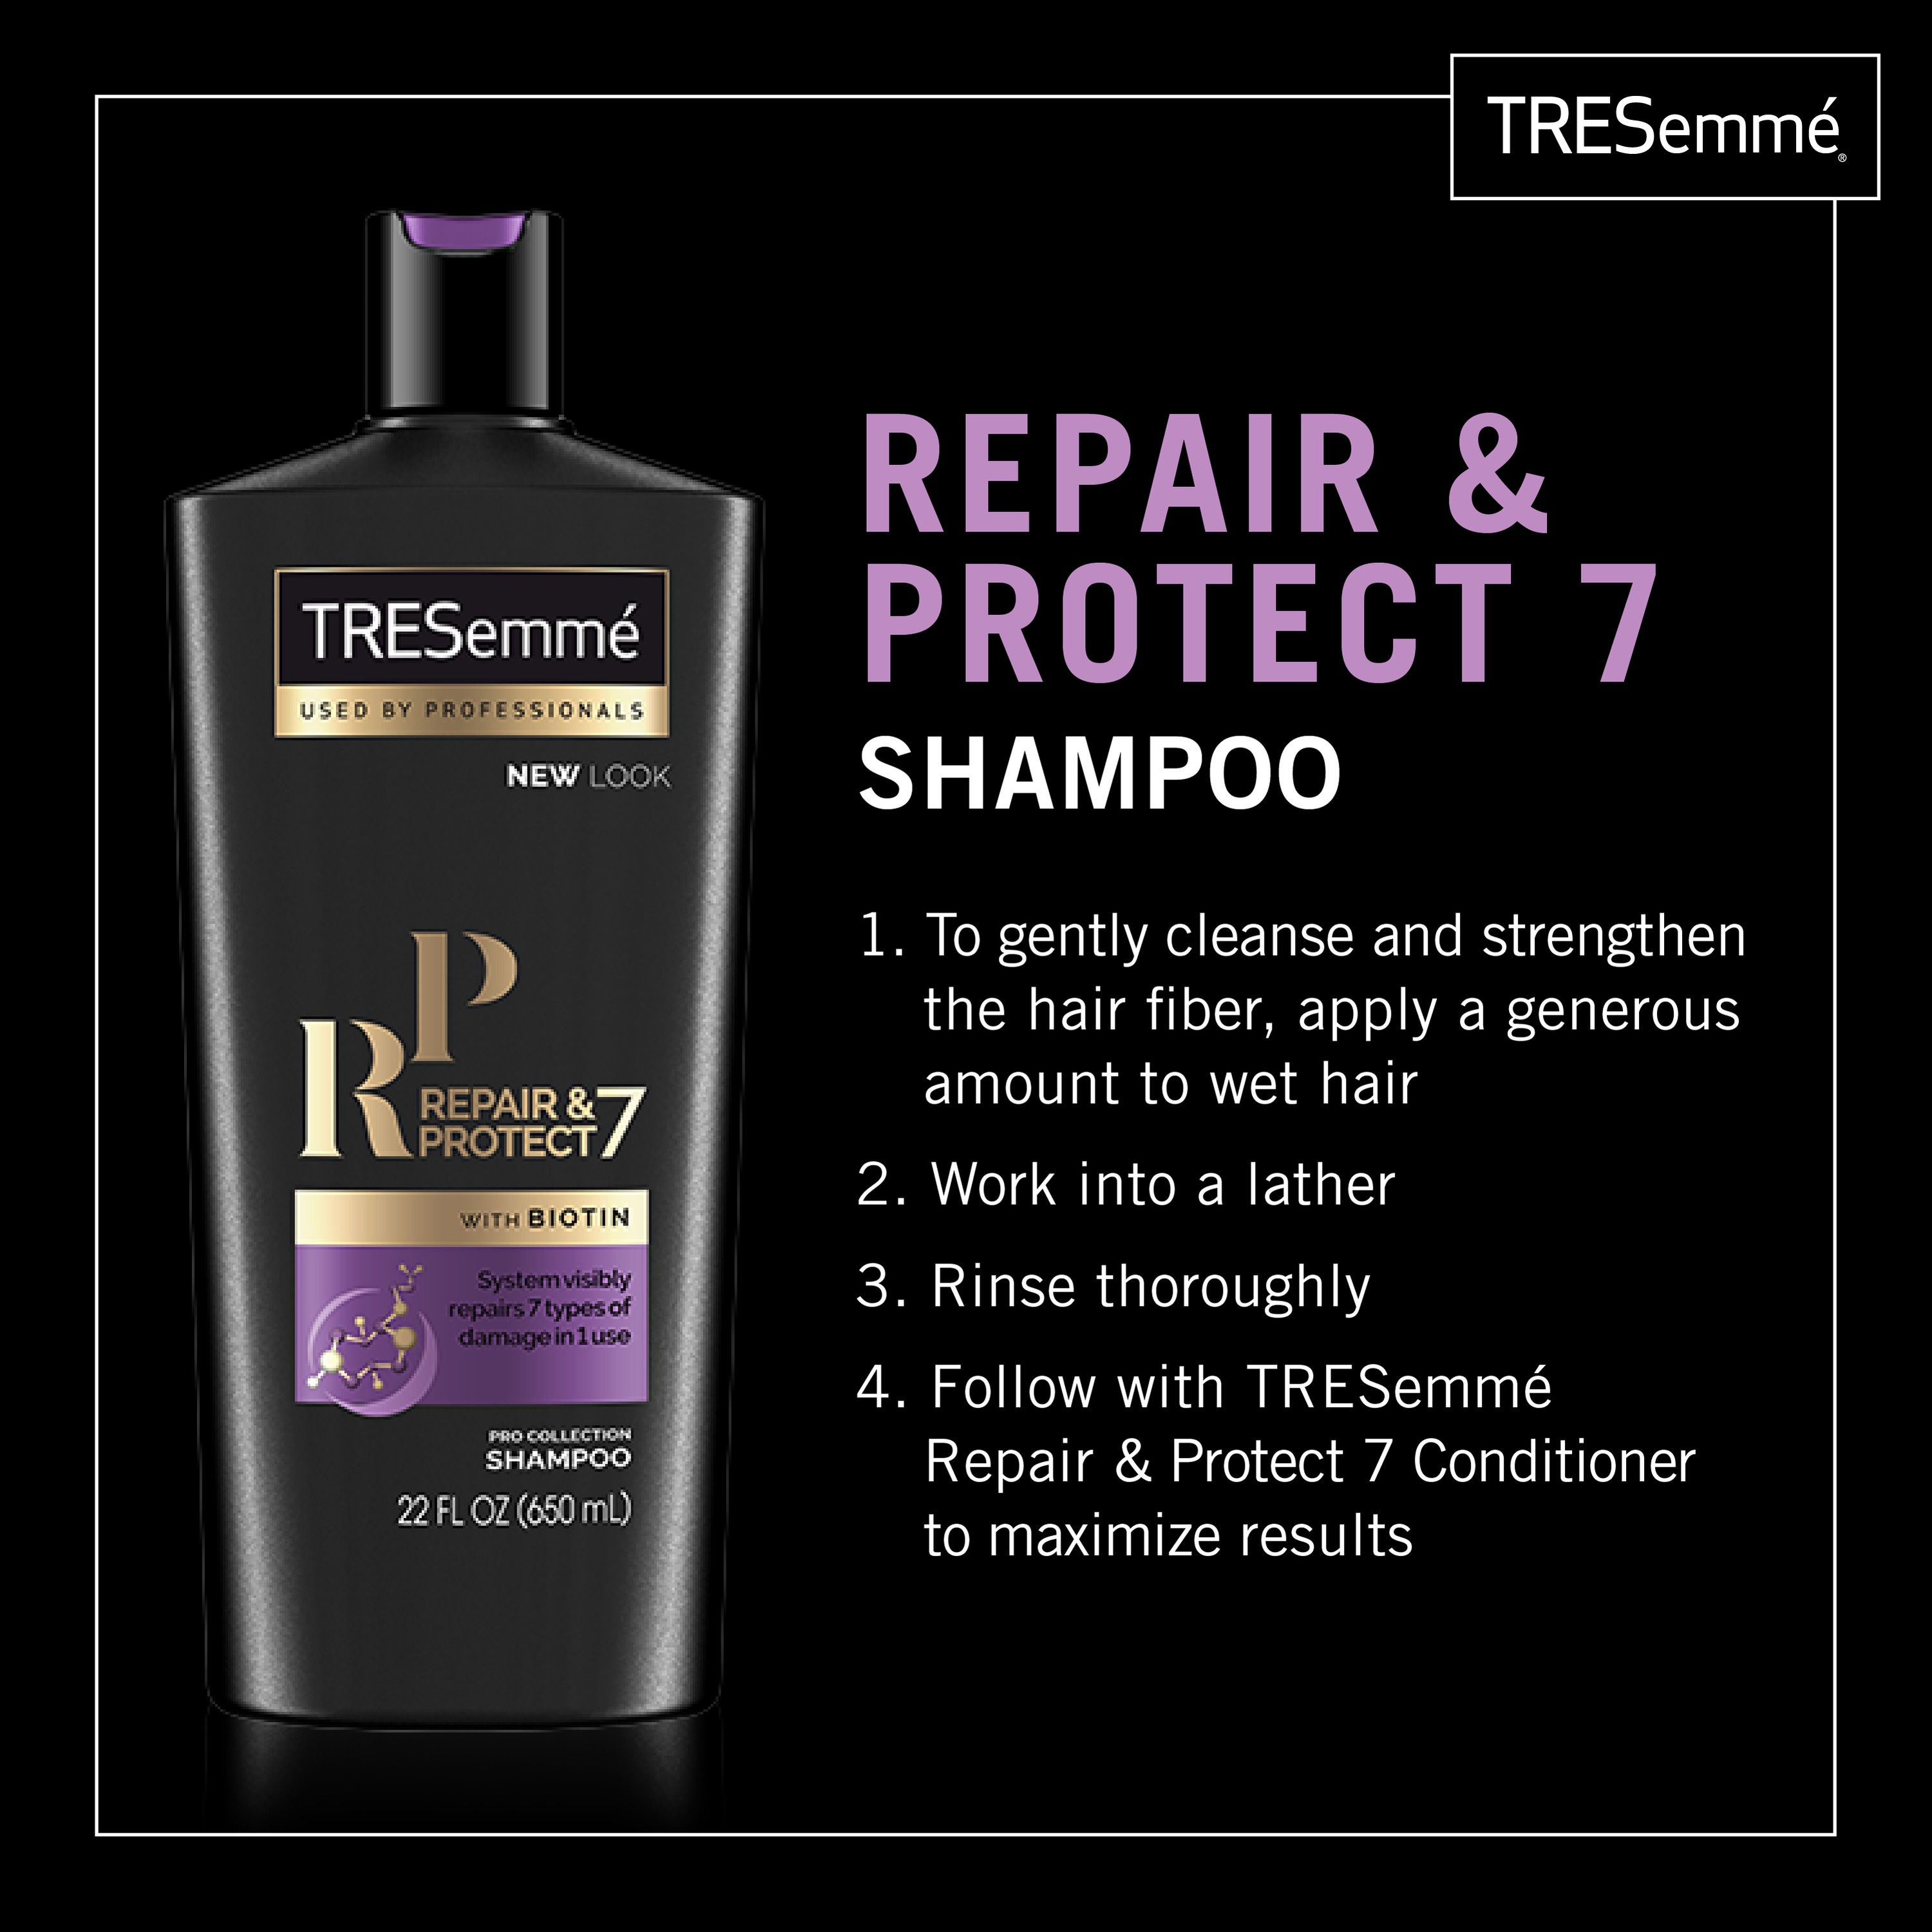 TRESemme 3-Pc Healthy & Protected Blowout Gift Set Repair and Protect with Hair Dryer (Shampoo, Conditioner) ($24.84 Value) - image 7 of 11